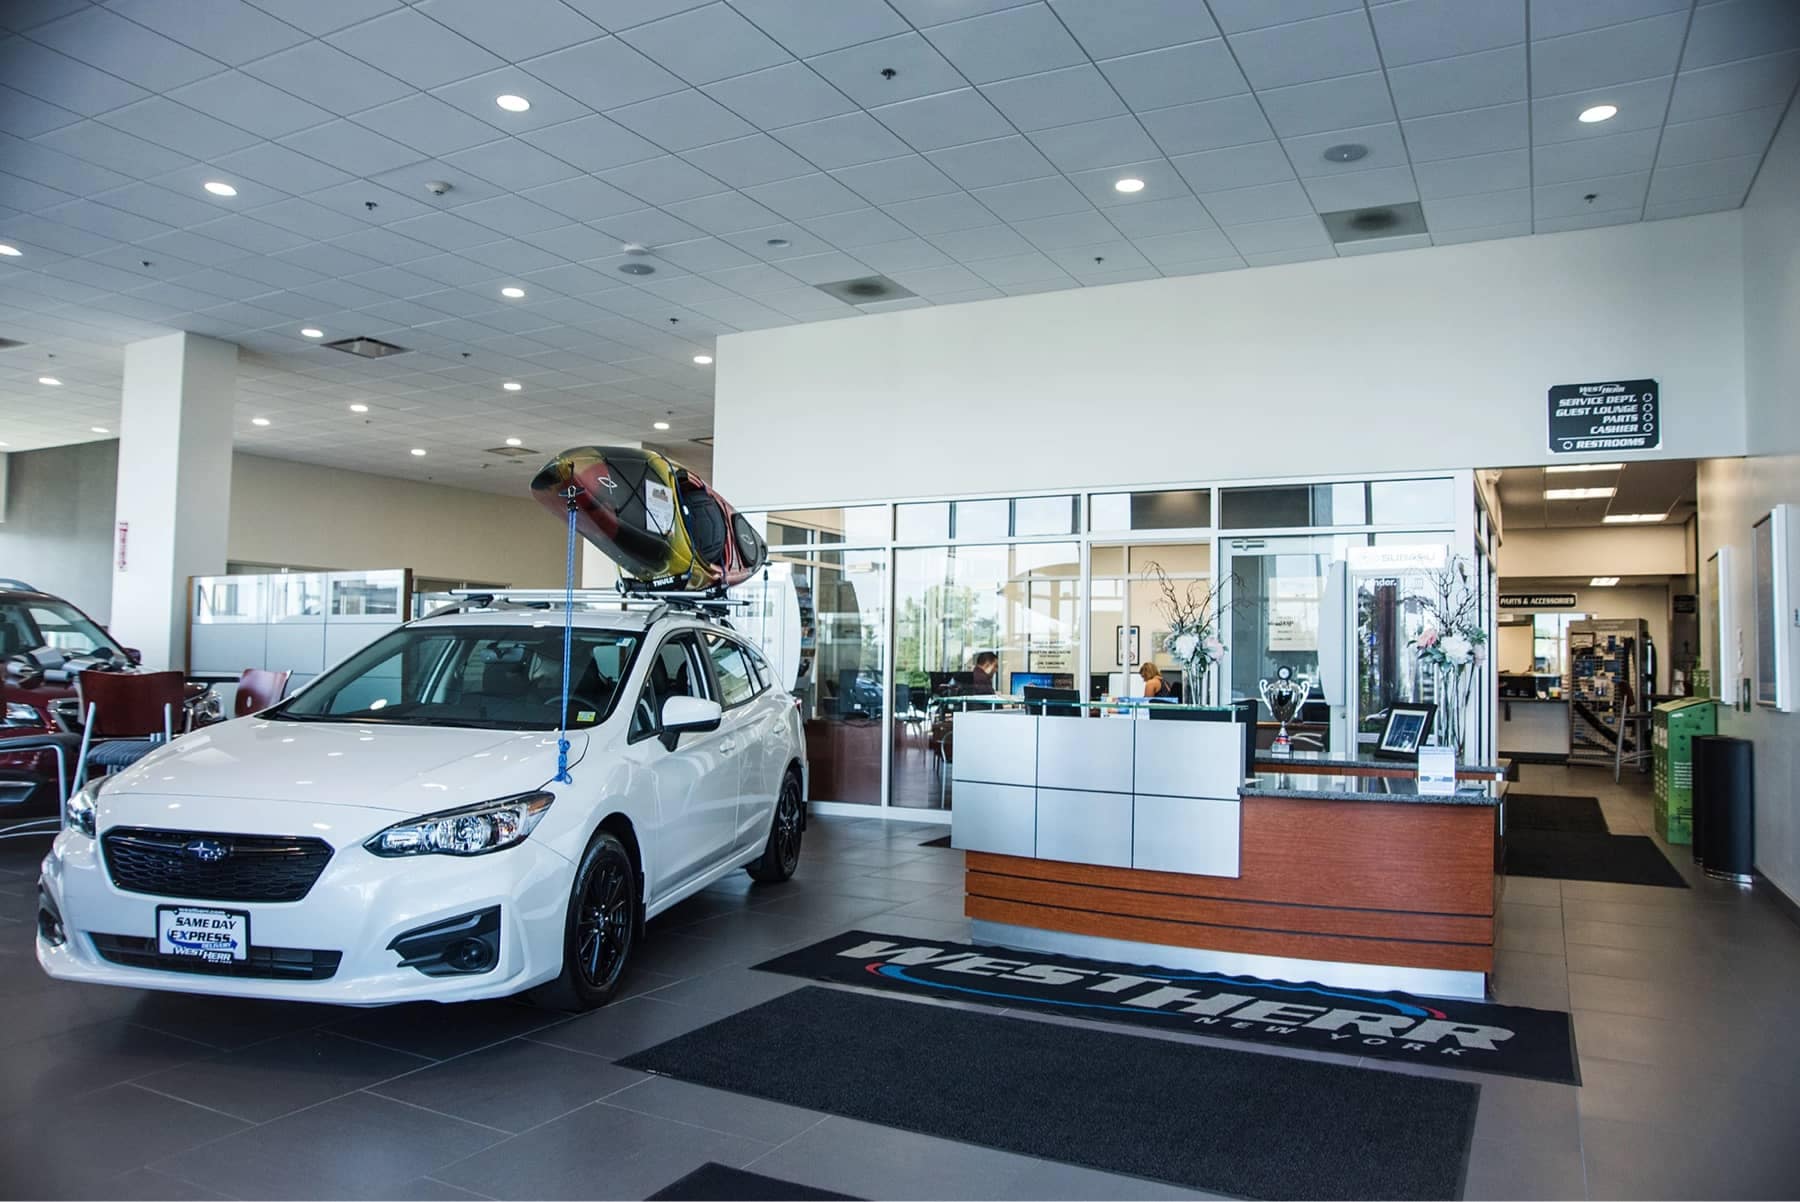 Inside view of the dealership